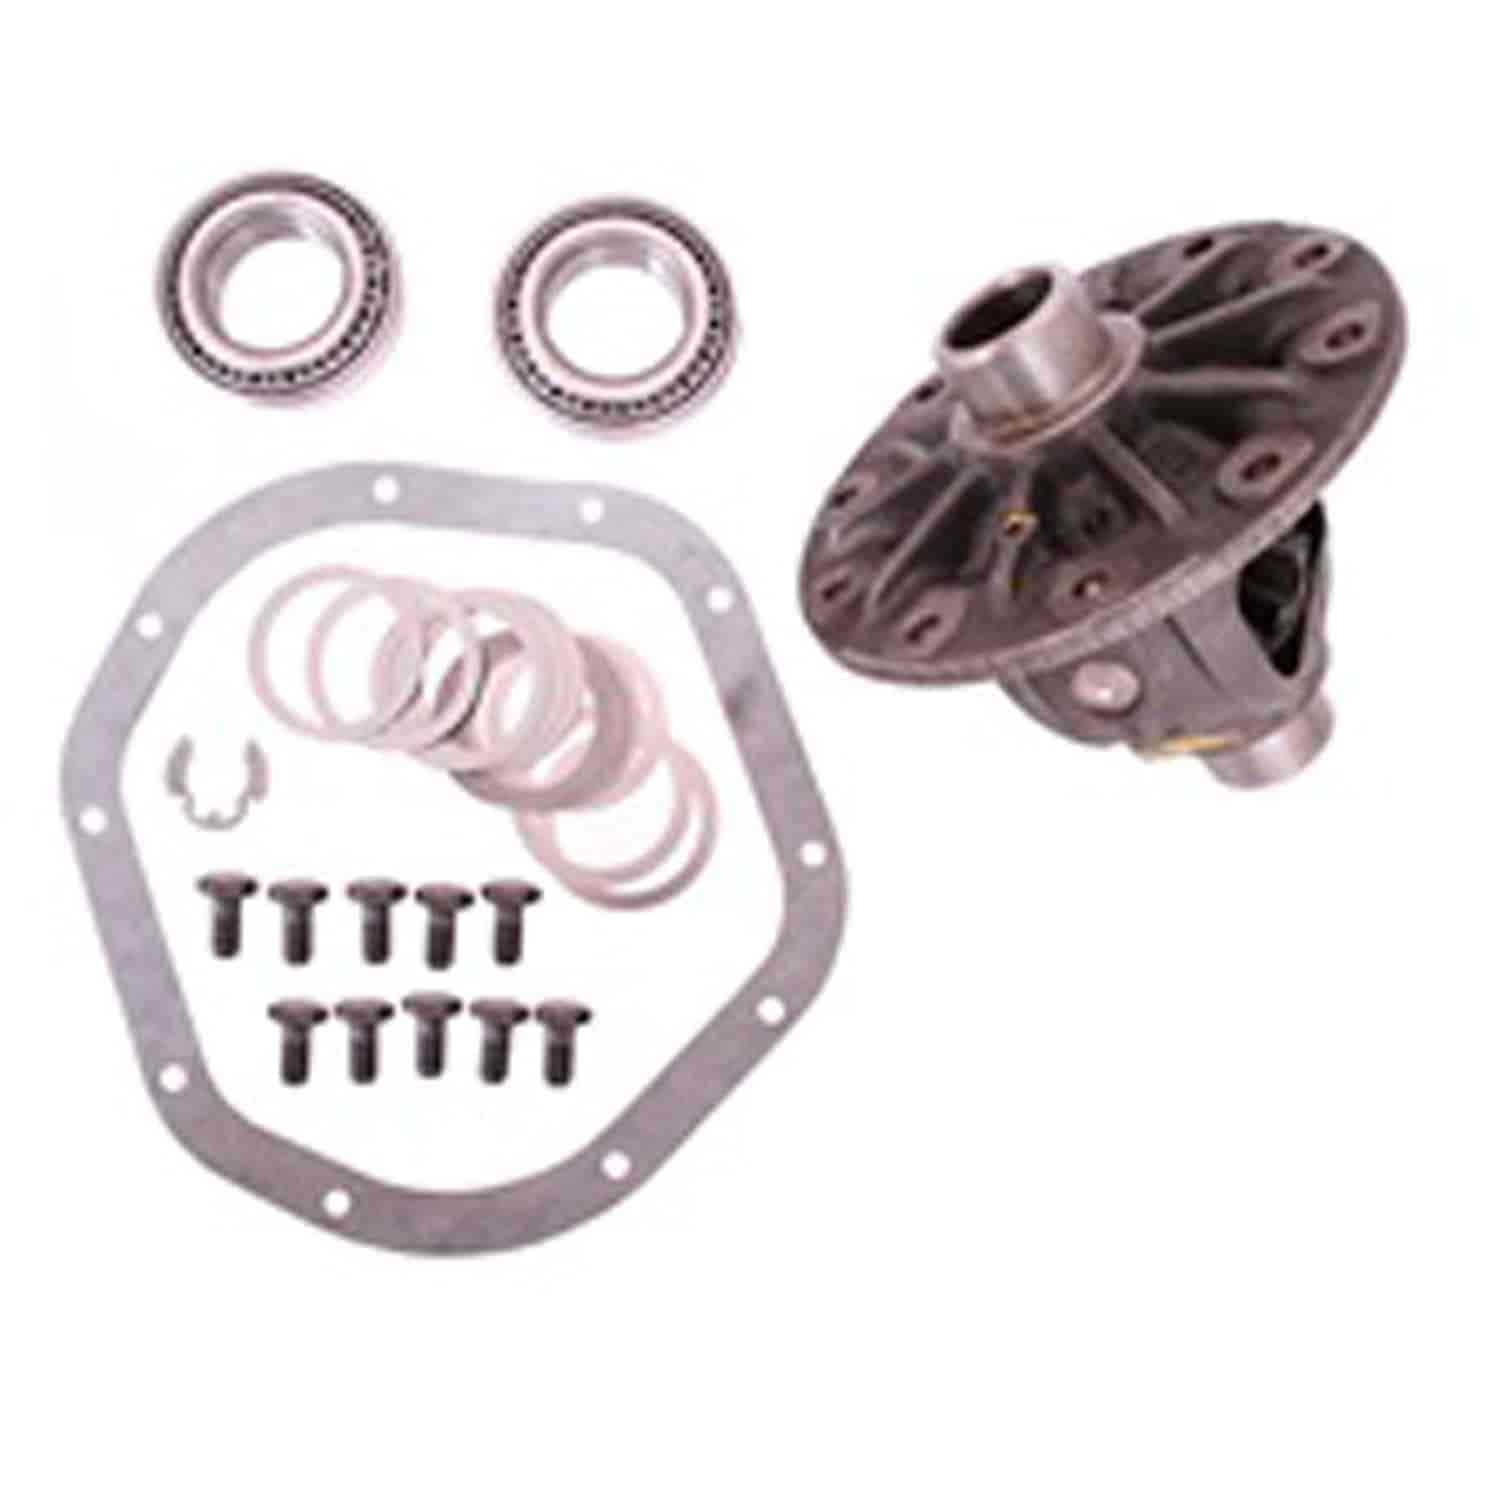 This differential carrier assembly from Omix-ADA fits 01-03 Jeep Wrangler TJ with rear Dana 44. 3.73 ratio. Spicer brand.